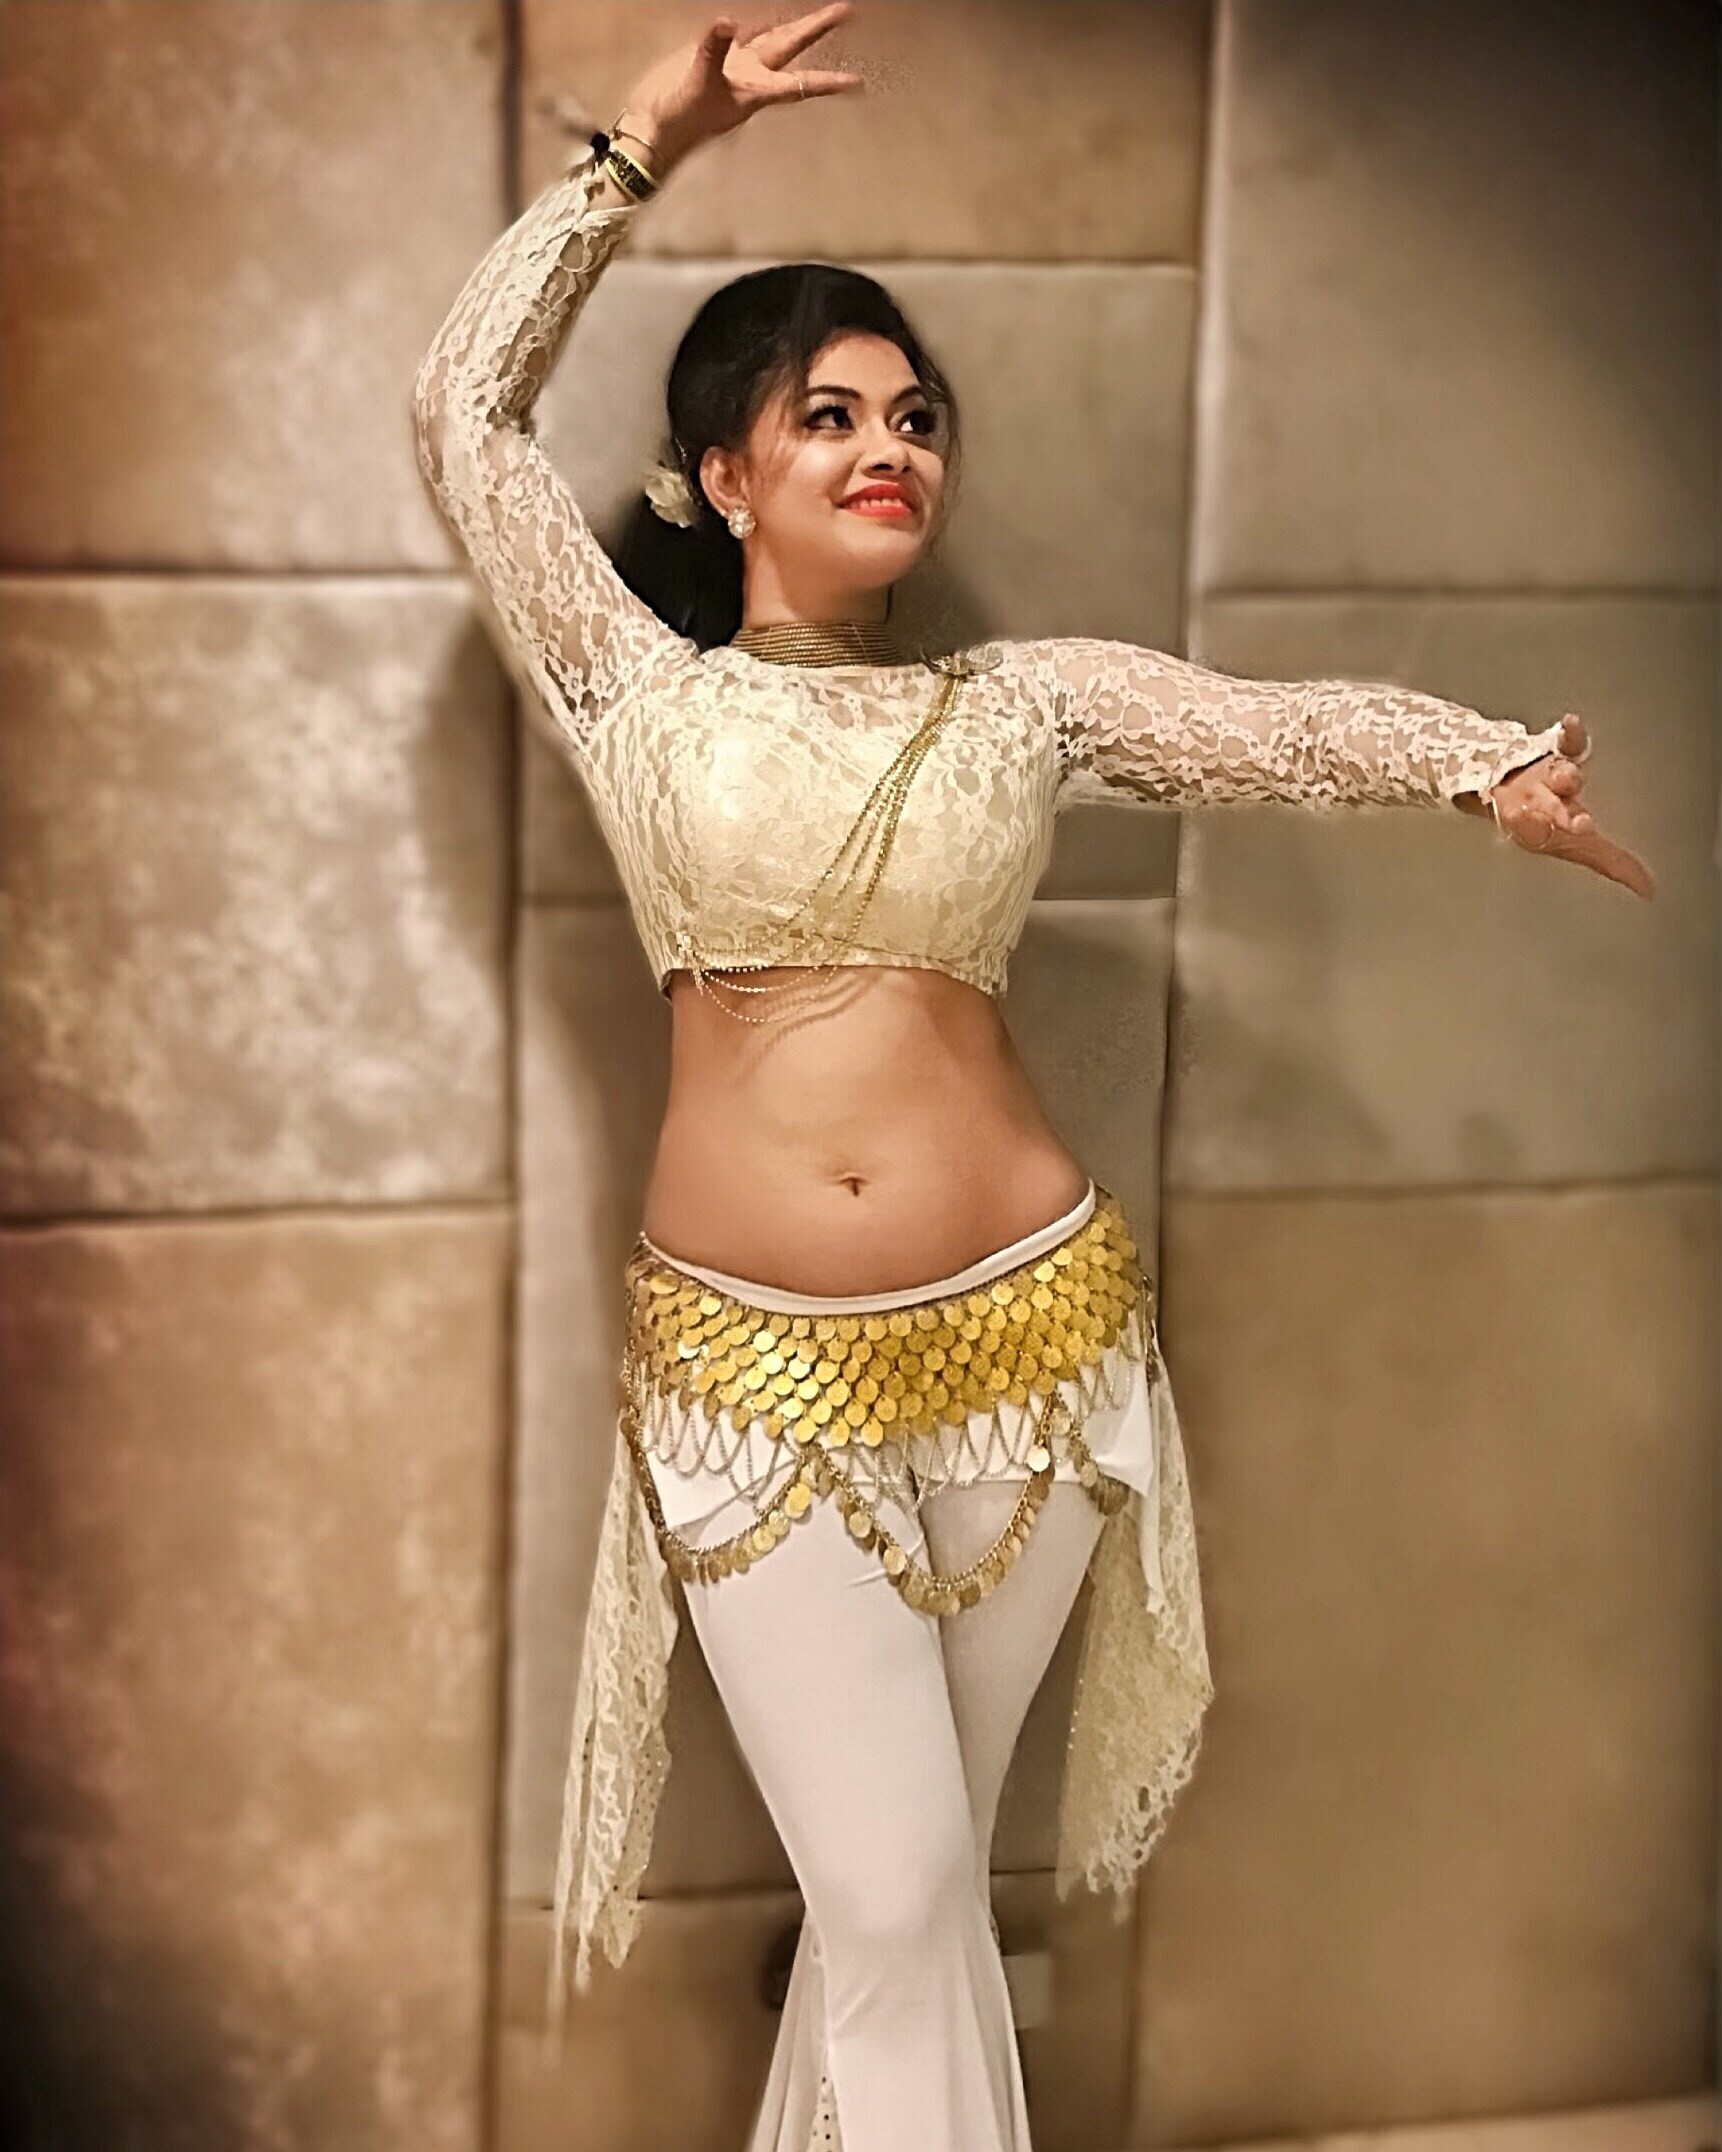 Having taught thousands of students in her 12-year journey with Tarantismo, Anusha believes women can use dance to develop self-esteem and confidence too.